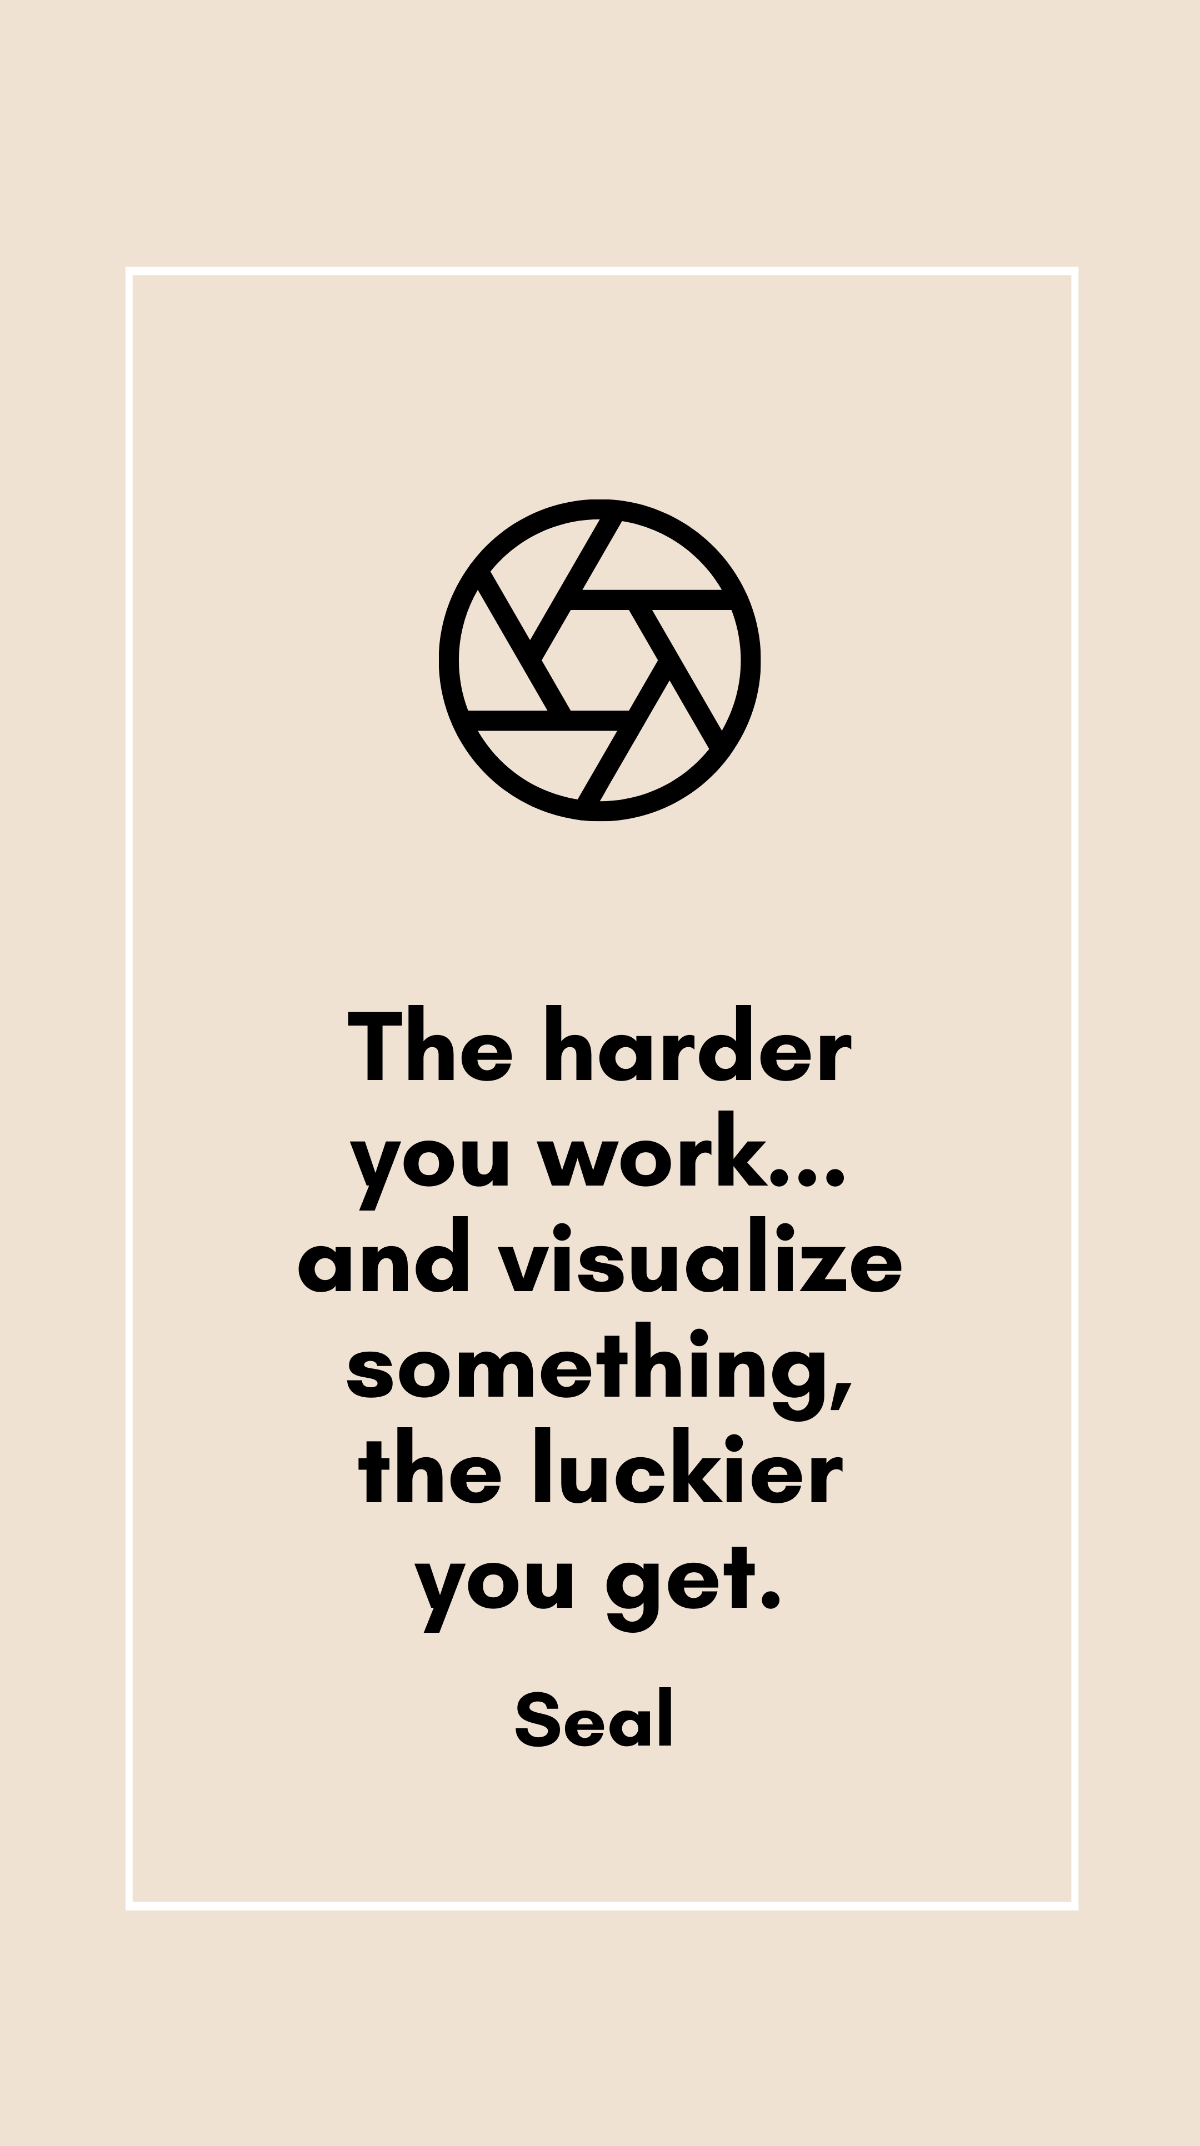 Seal - The harder you work... and visualize something, the luckier you get. Template